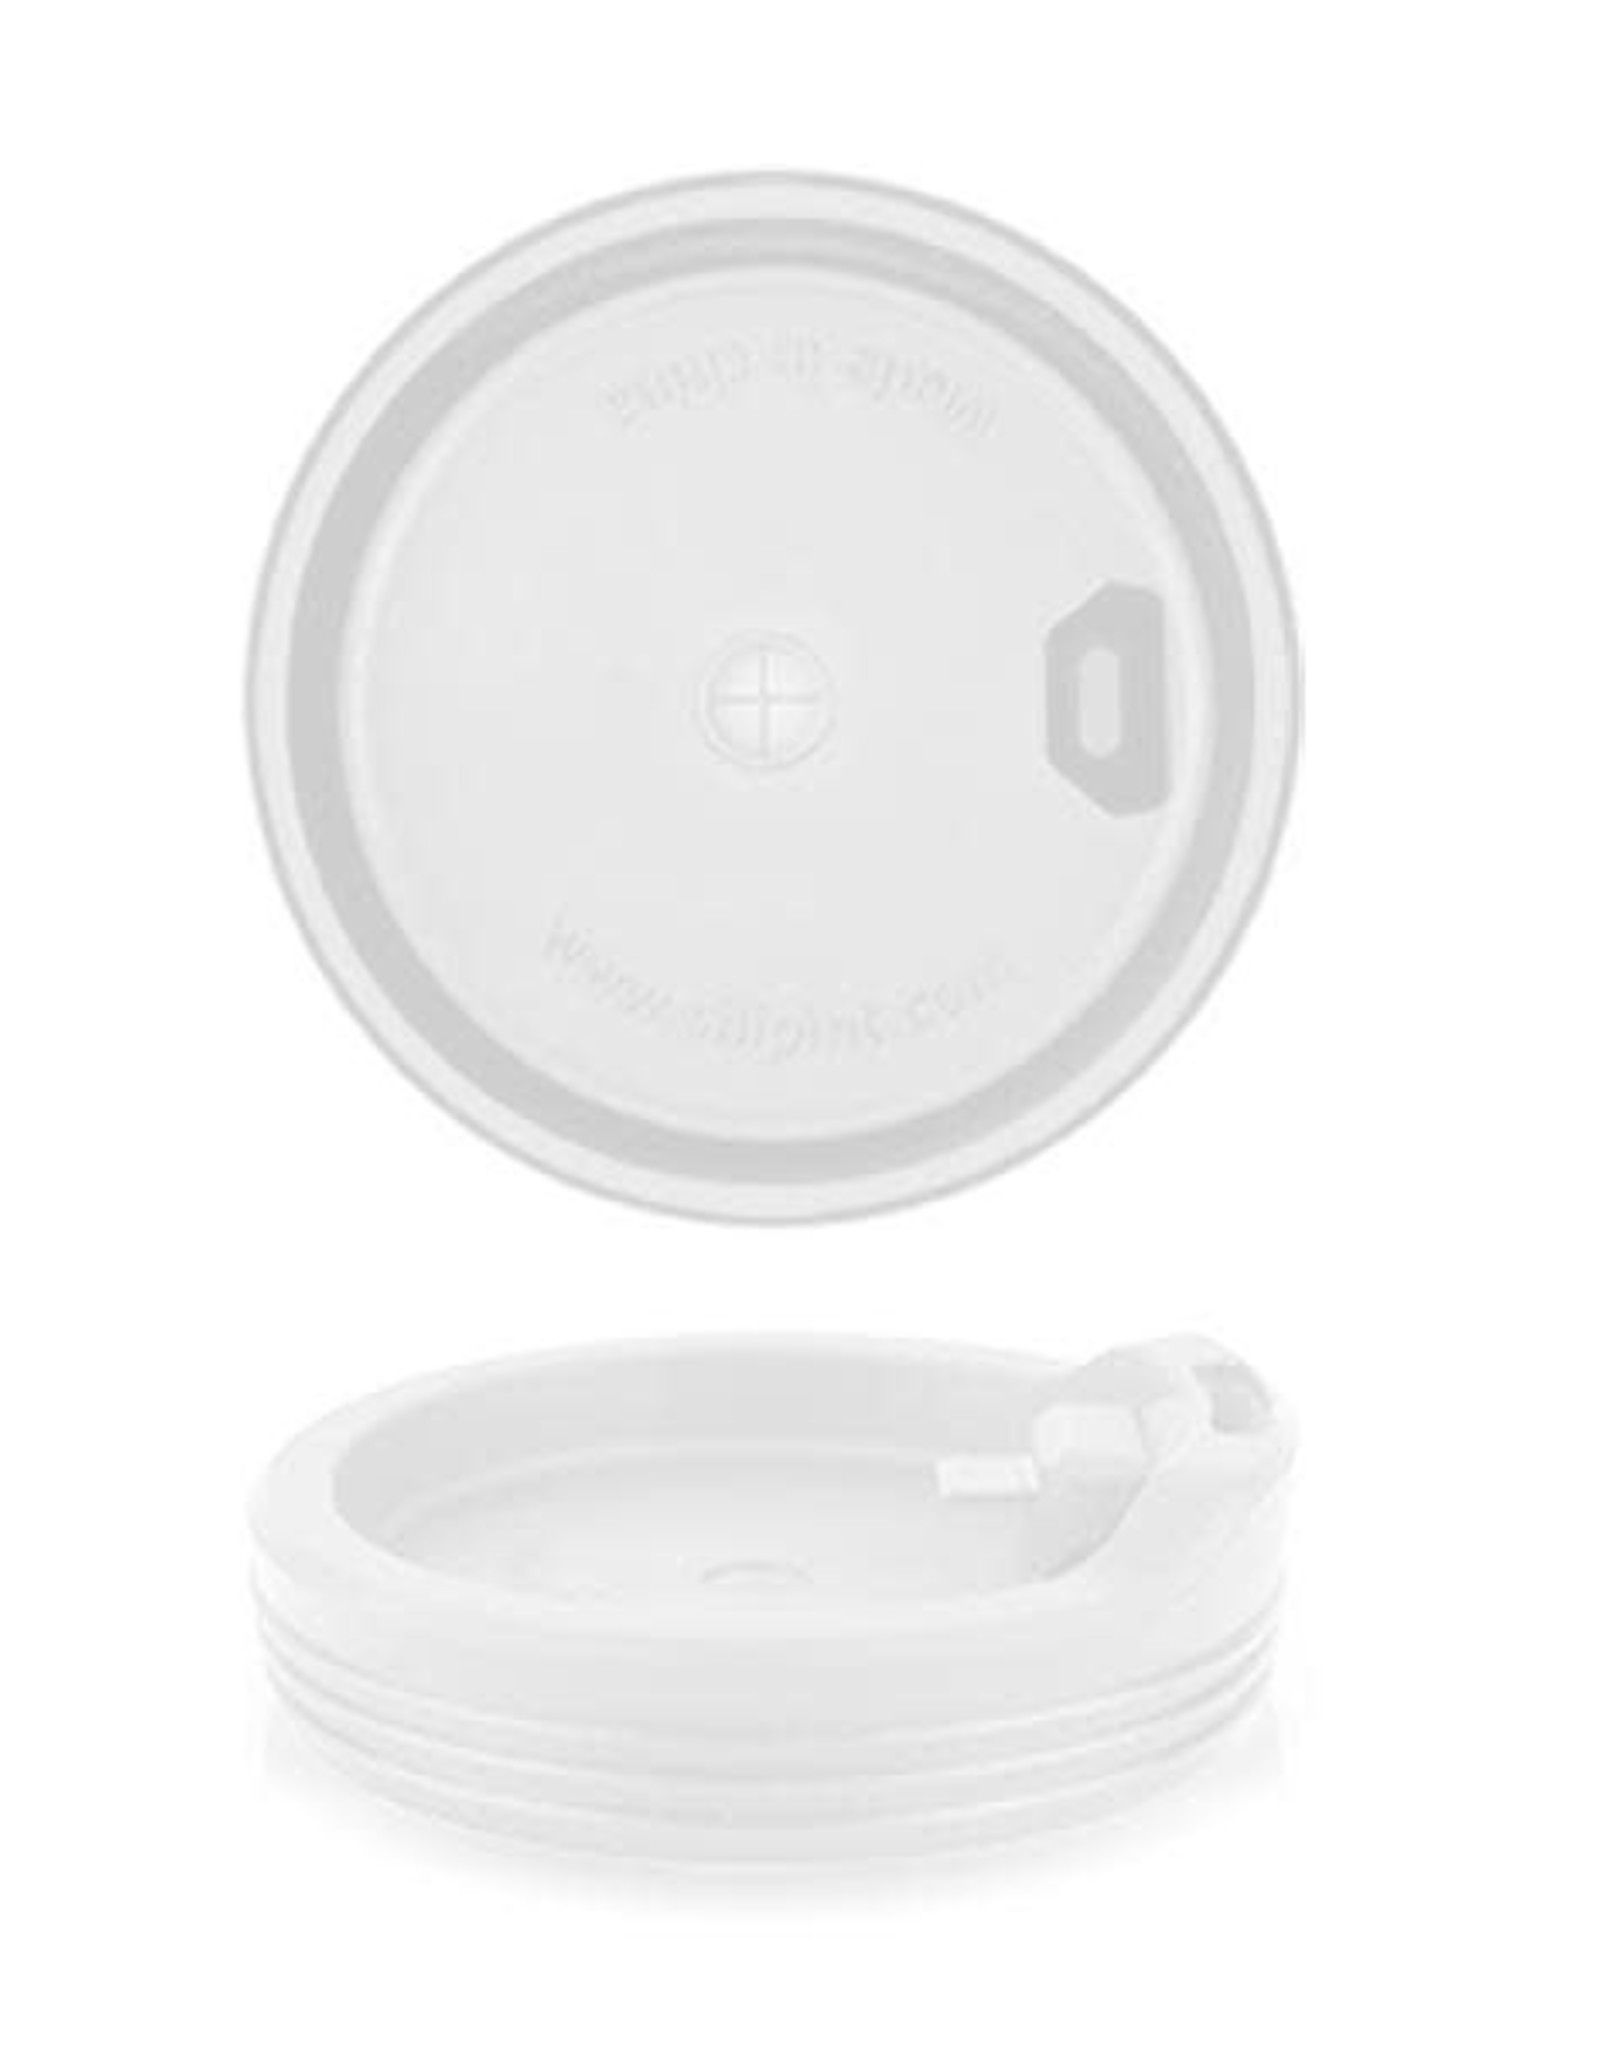 Silipint SILICONE LID - pairs with silipint cup